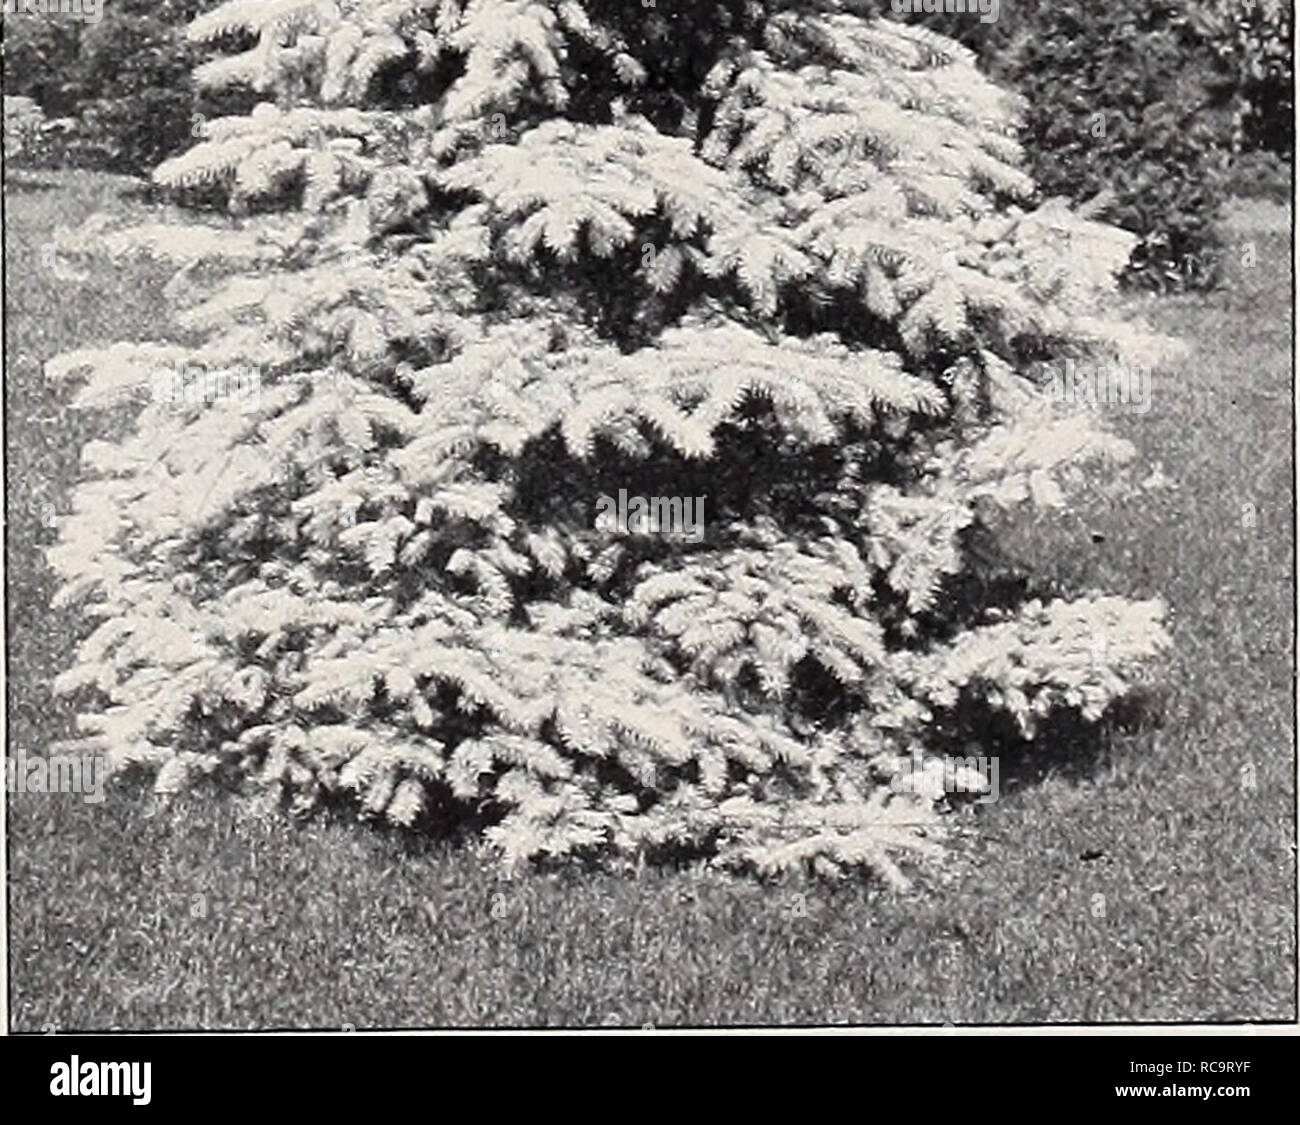 . Ellwanger &amp; Barry : Mount Hope nurseries. GENERAL CATALOGUE. 67 ABIES [including Picea and Tsuga], Spruce, Fir and Hemlock. Section i. Abies. Spruce and Hemlock. Tsuga —the Hemlocks, with flat leaves Leaves fieedle shaped, scattered all around the shoots (including mostly two ranked). A. alba. White Spruce. A. A native tree of medium size, varying in height from 25 to 50 feet, of pyramidal form. Foliage silvery gray, and bark light colored. Very hardy and valuable. 50c. fvar. cserulea. The Glaucous Spruce. B. A small and beautiful variety, of rather loose spread- ing habit, with bluish g Stock Photo